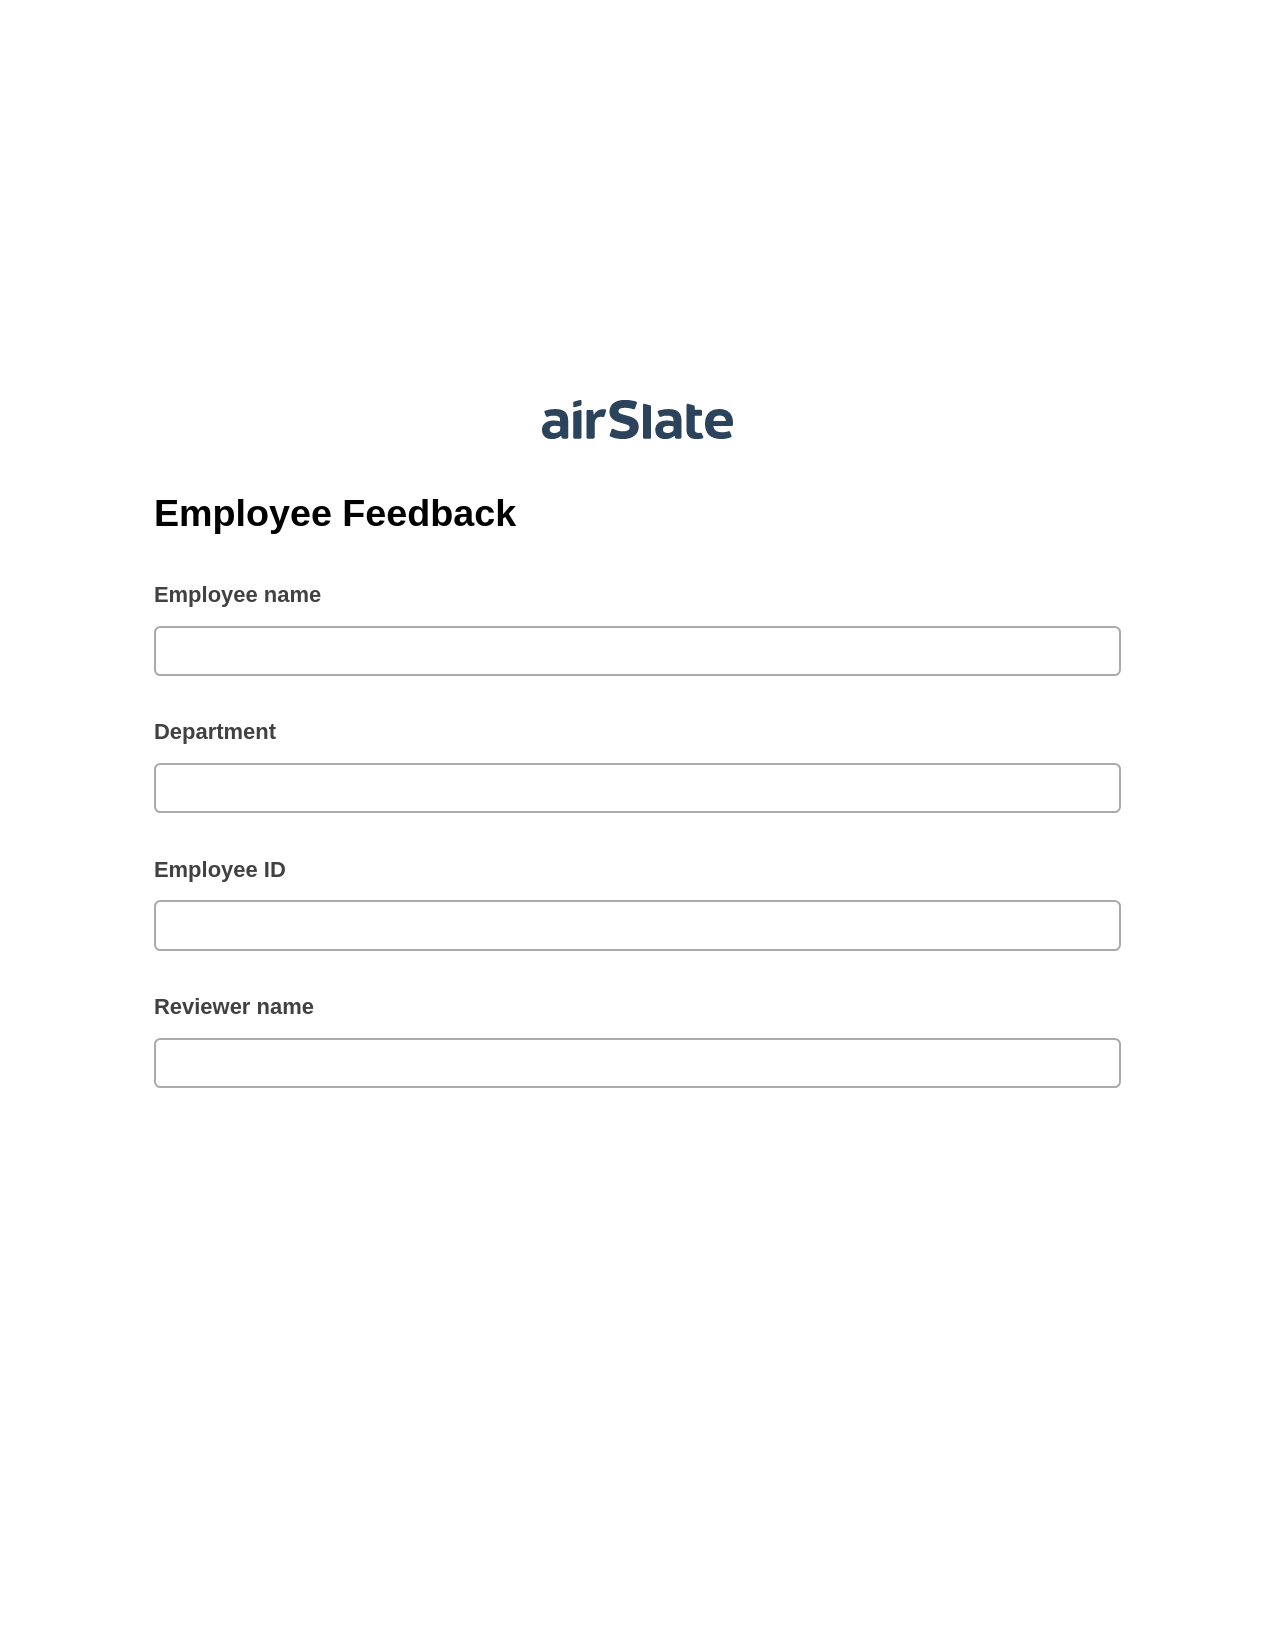 Employee Feedback Pre-fill from Salesforce Records with SOQL Bot, Mailchimp send Campaign bot, Dropbox Bot